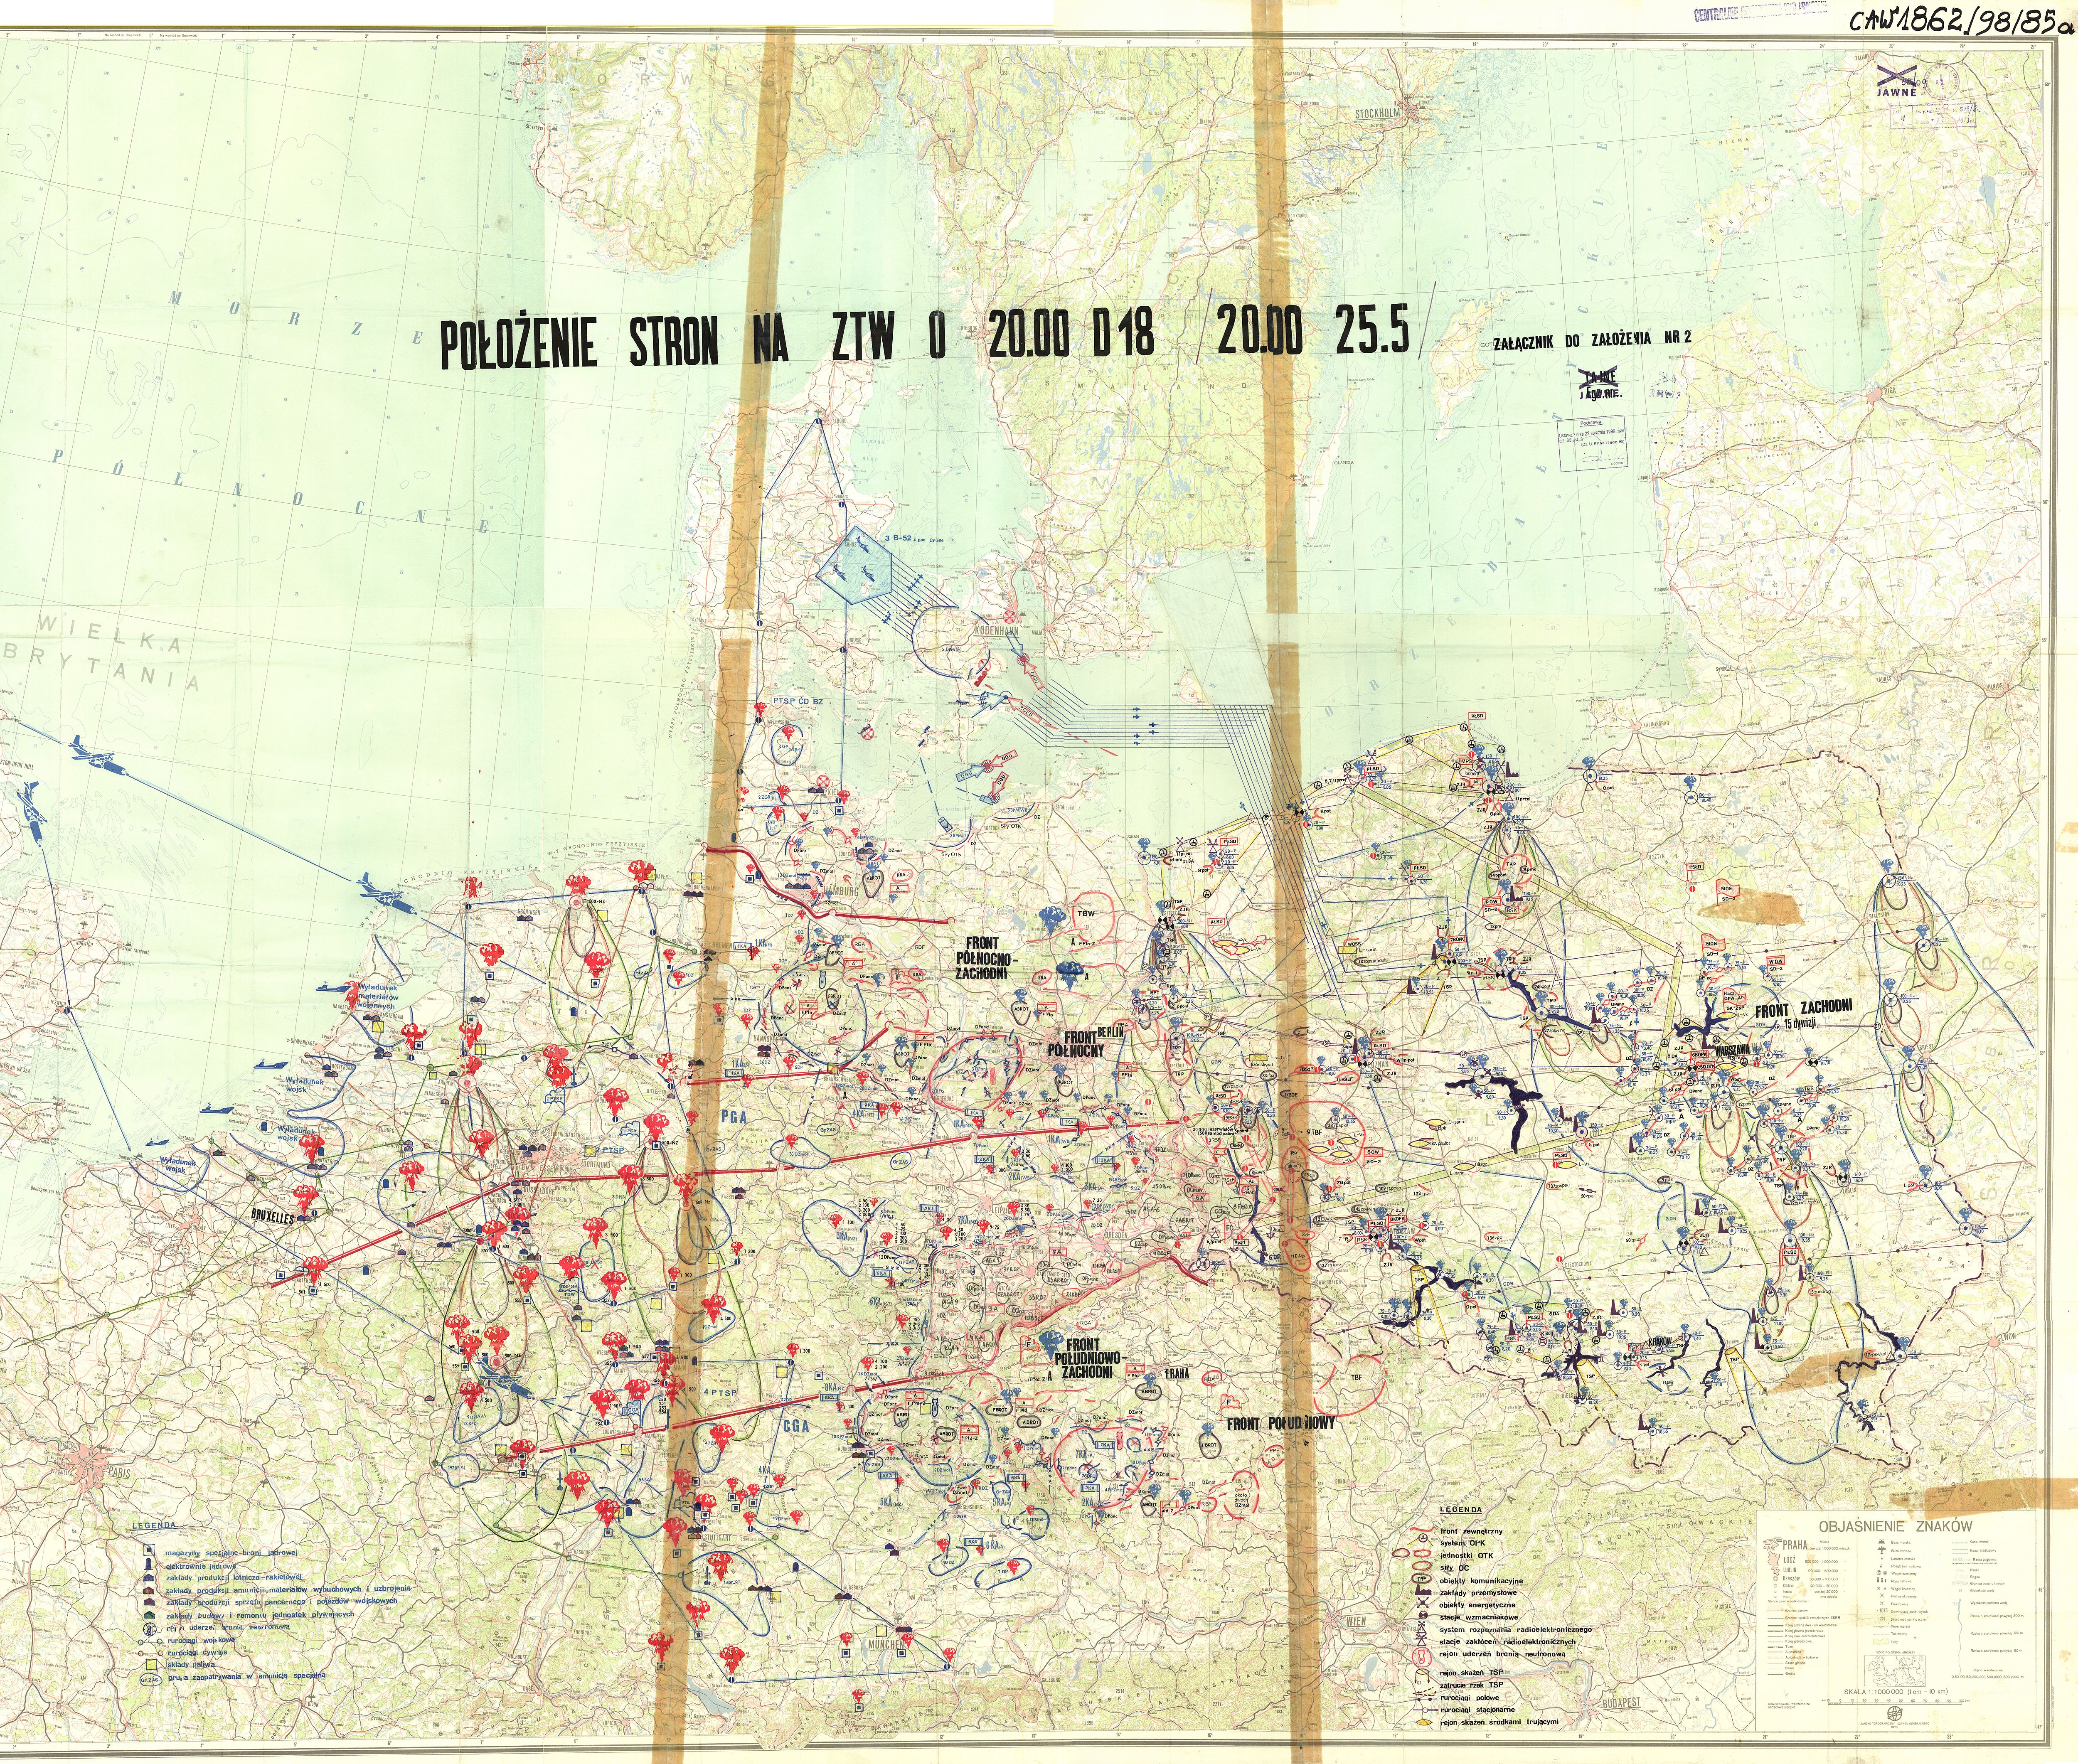 General 5000x4245 map war 1979 (Year) Poland Polish Armed Forces Warsaw Pact NATO simulation atomic bomb nuclear Europe Cold War Polish old map digital art